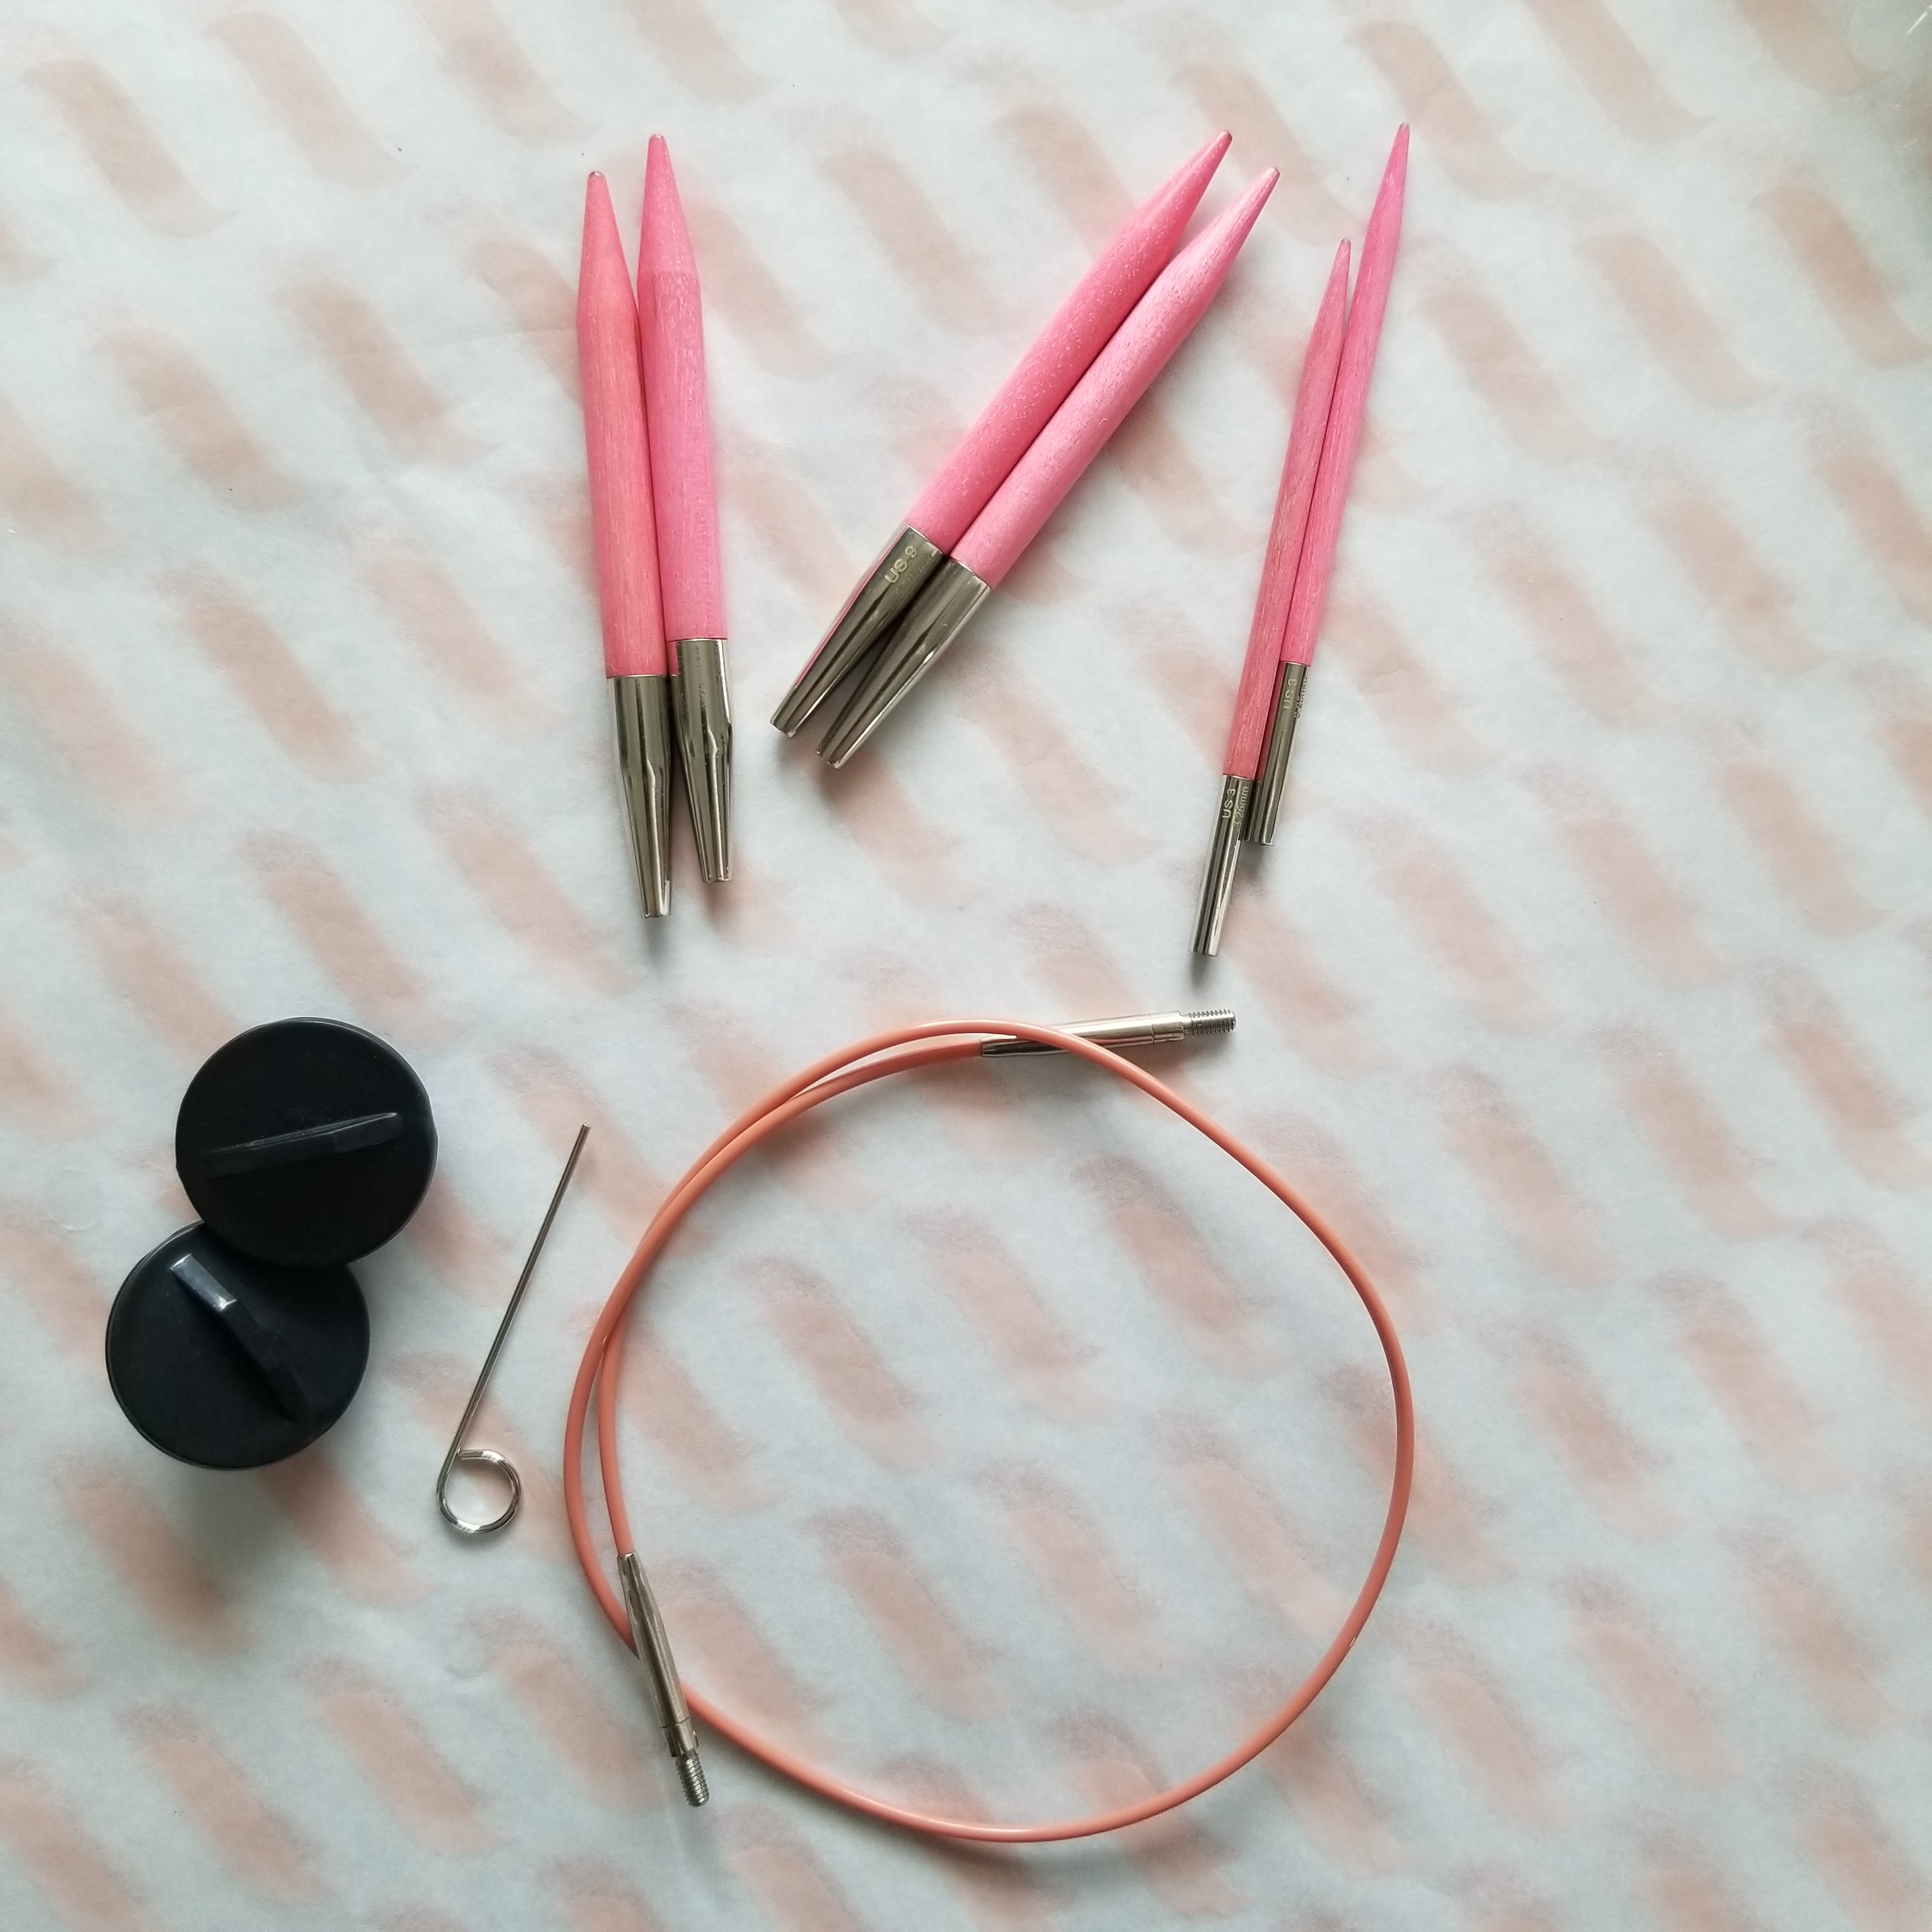 Lykke Blush Swivel Interchangeable Cord - 16 with 3.5 tips